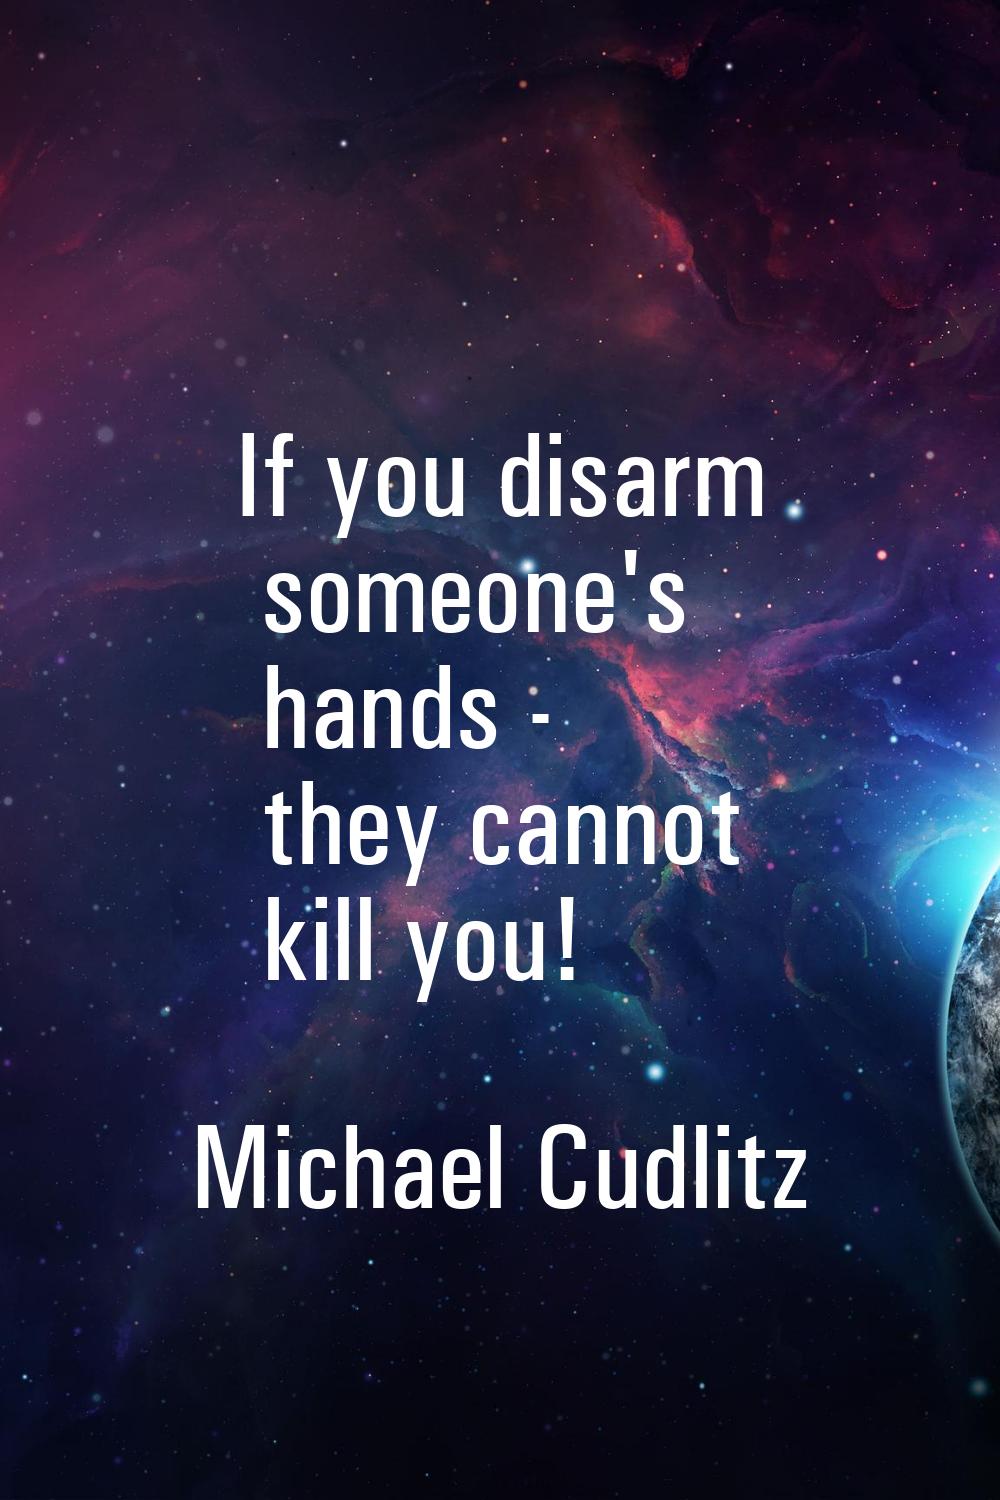 If you disarm someone's hands - they cannot kill you!